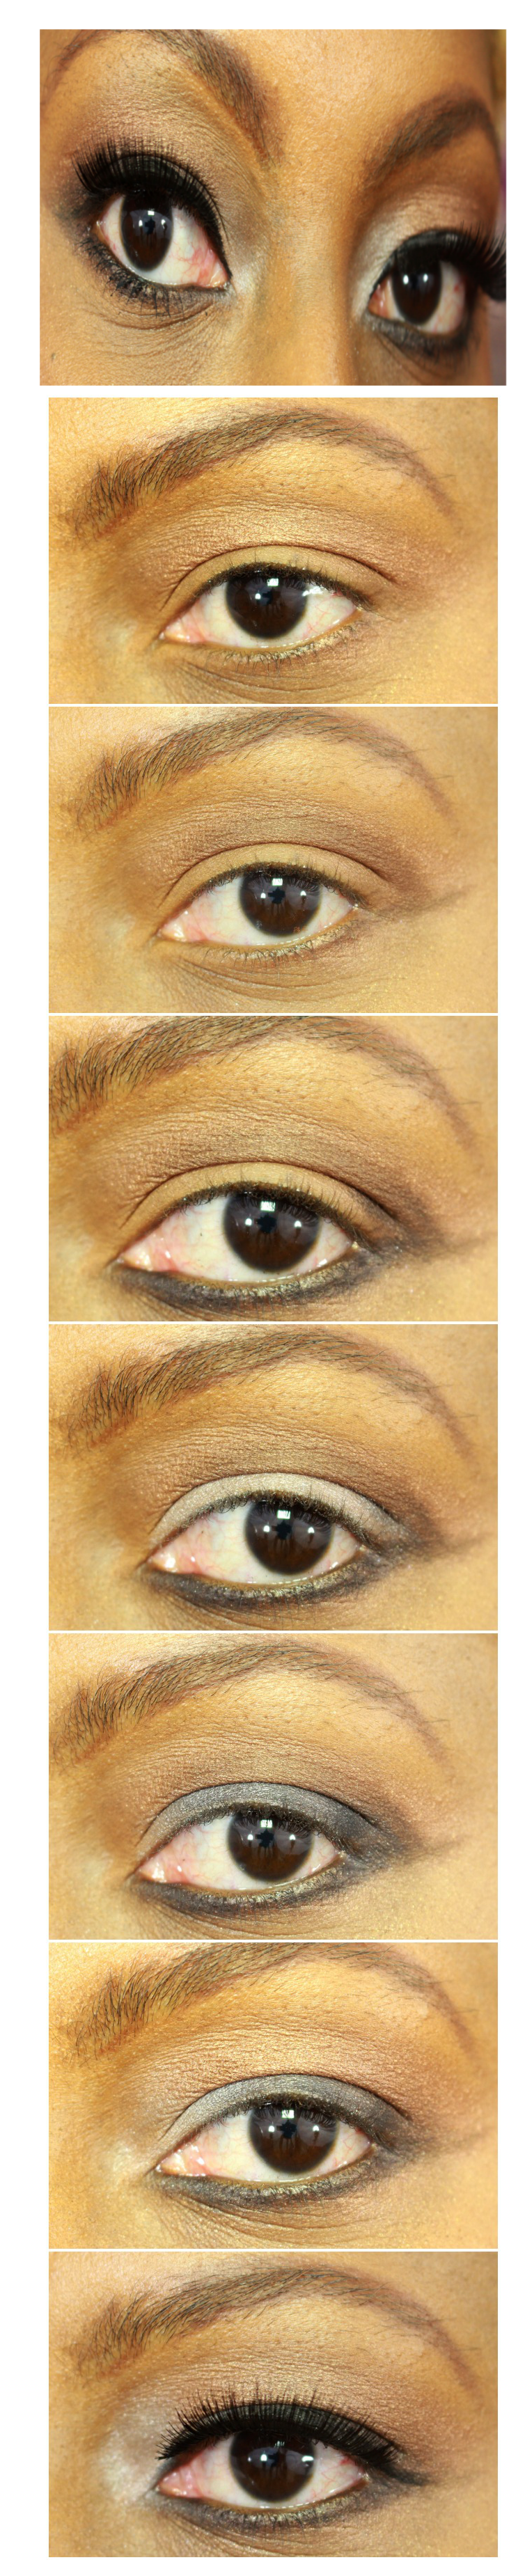 Too Faced Cat Eyes Pictorial